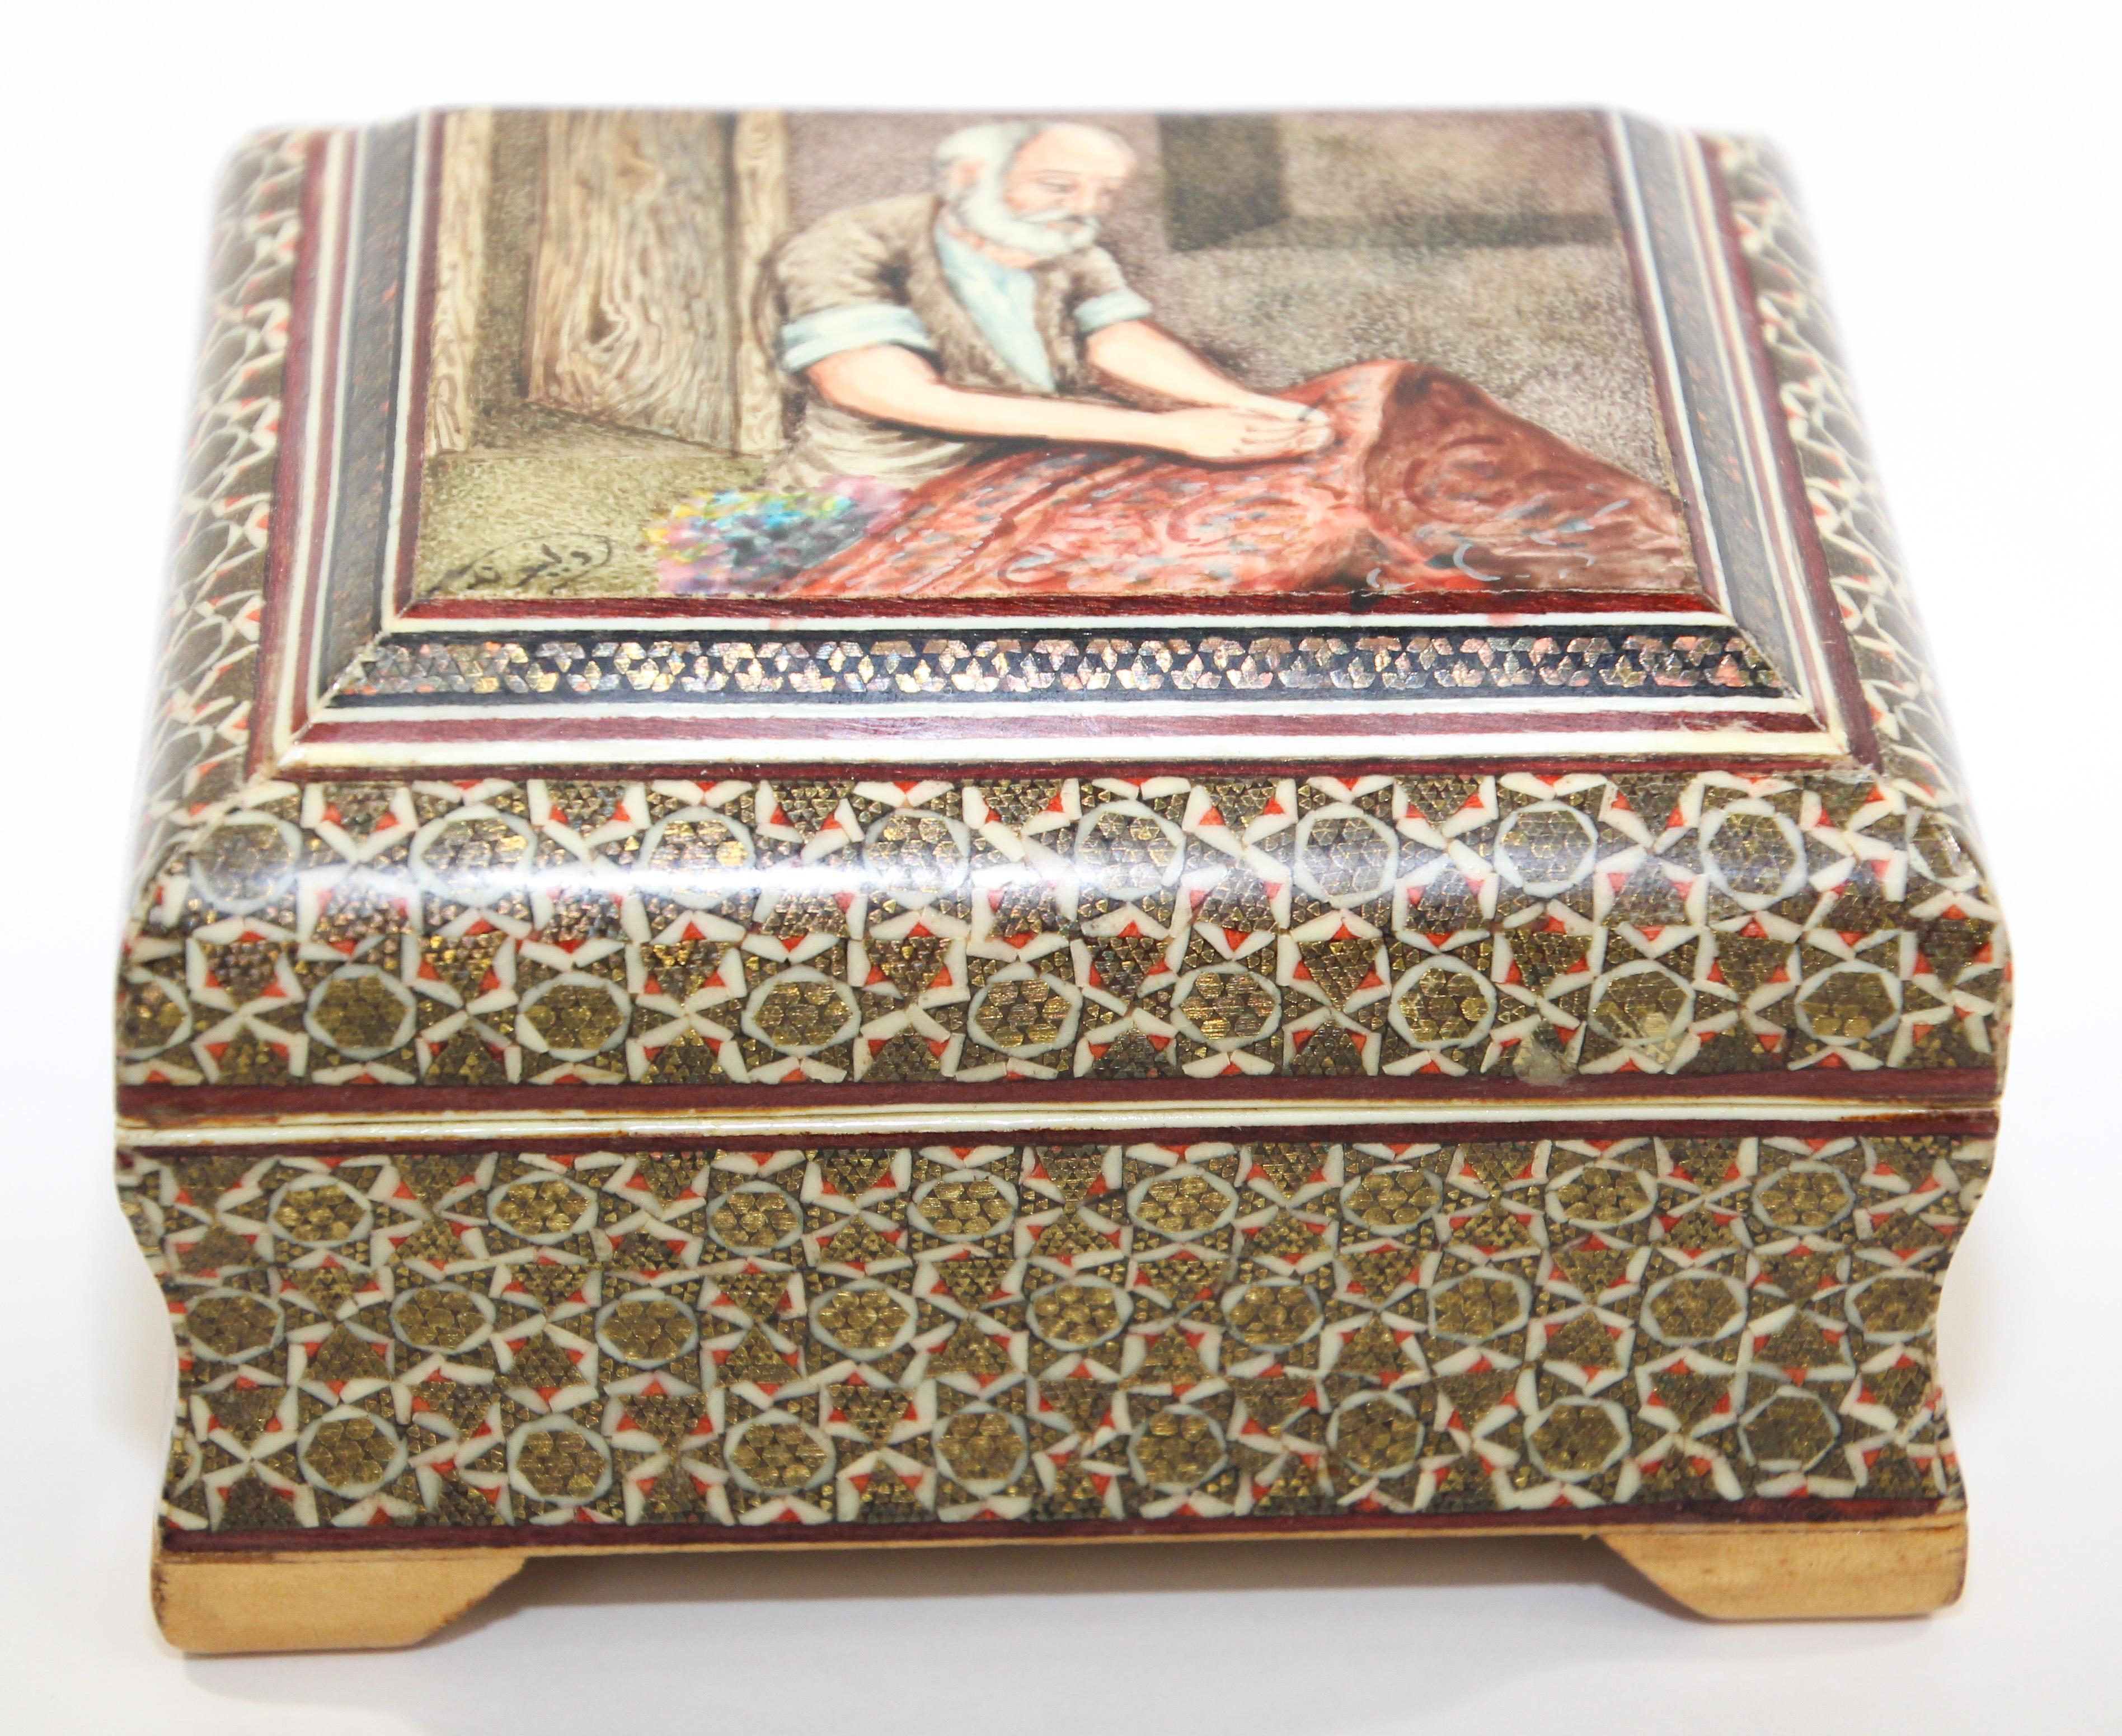 Exquisite handcrafted Middle Eastern mosaic marquetry inlaid wood box.
Small octagonal box intricately decorated with a miniature painting of an old man with a textile in his hand motif and inlaid with mosaic marquetry.
Middle Eastern, Asian micro